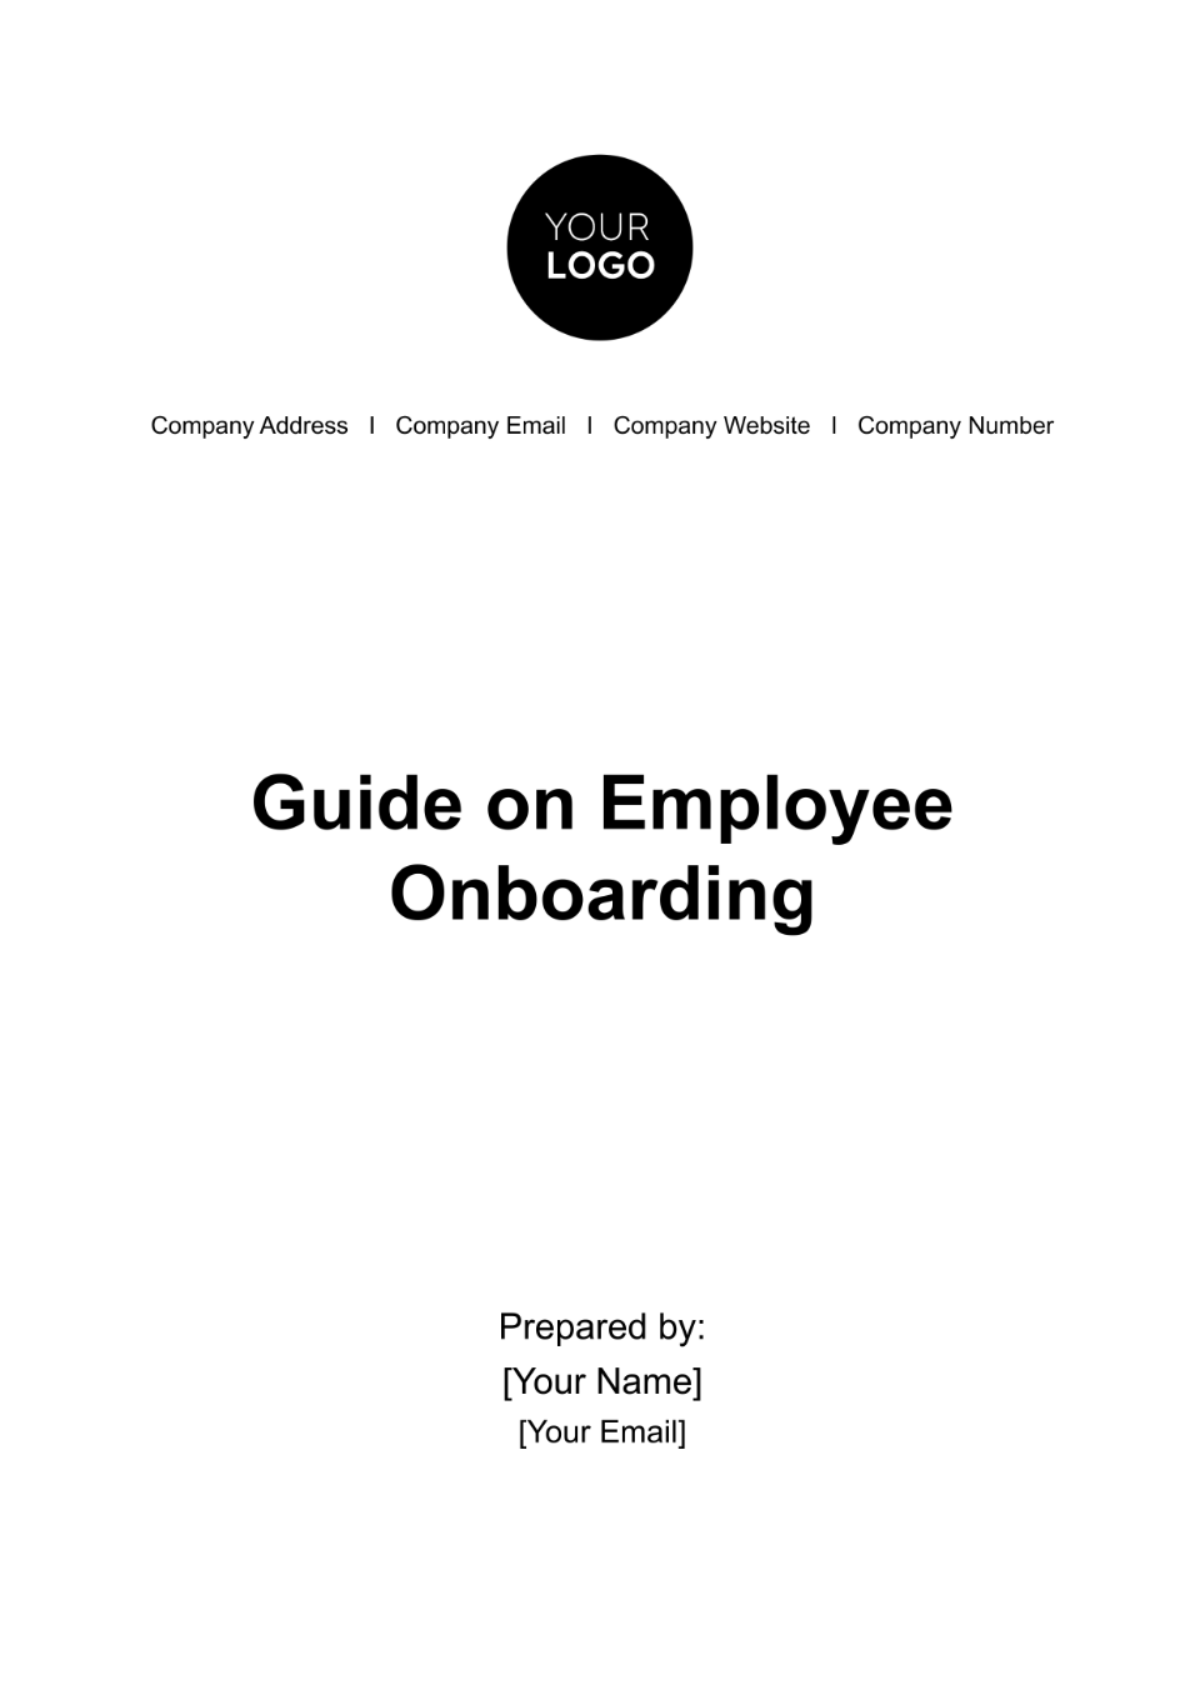 Free Guide on Employee Onboarding HR Template